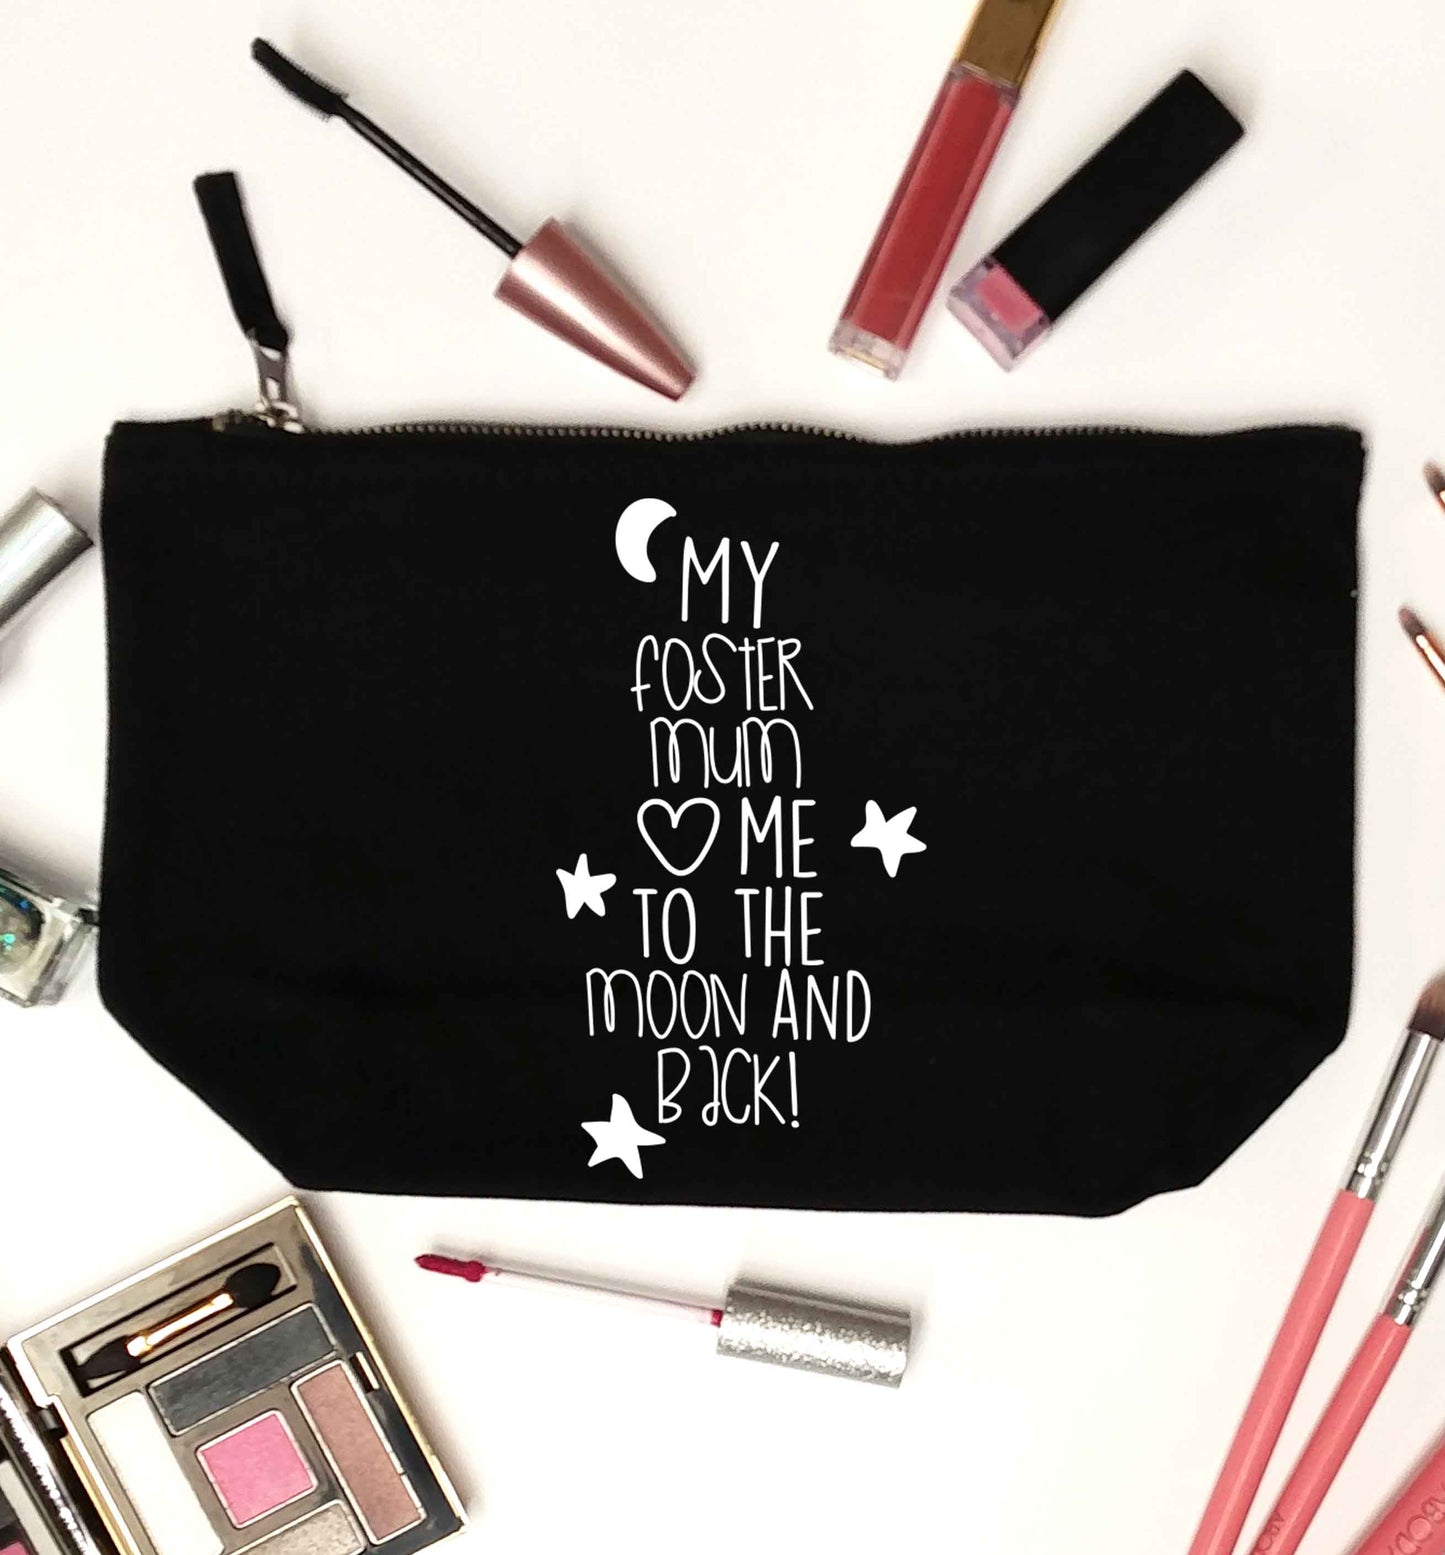 My foster mum loves me to the moon and back black makeup bag